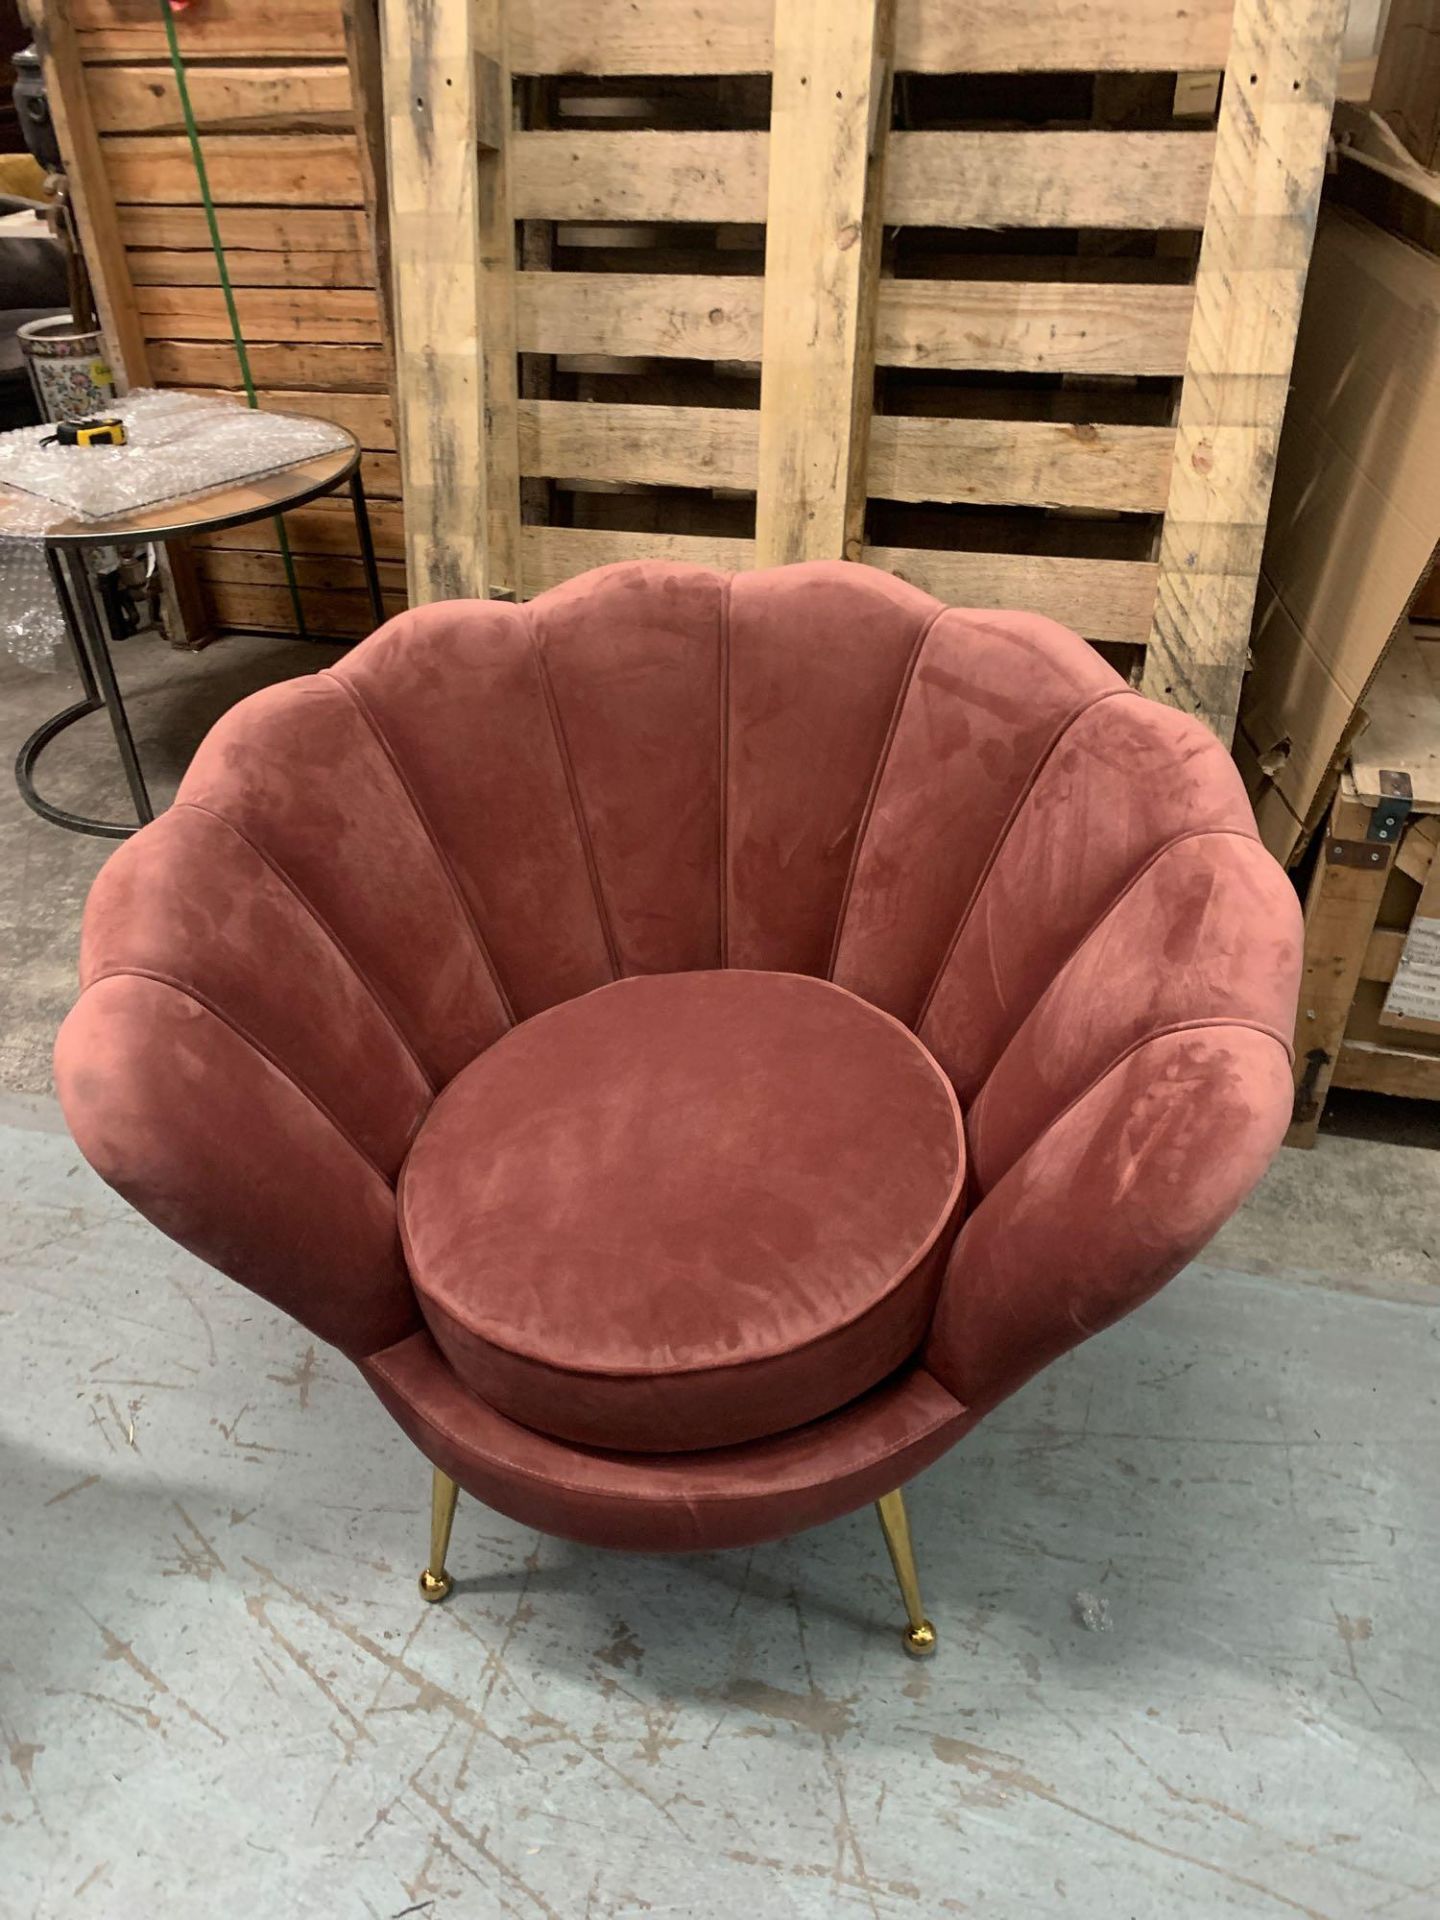 Rivello Armchair Pink W930 x D800 x H780mm - Image 3 of 4